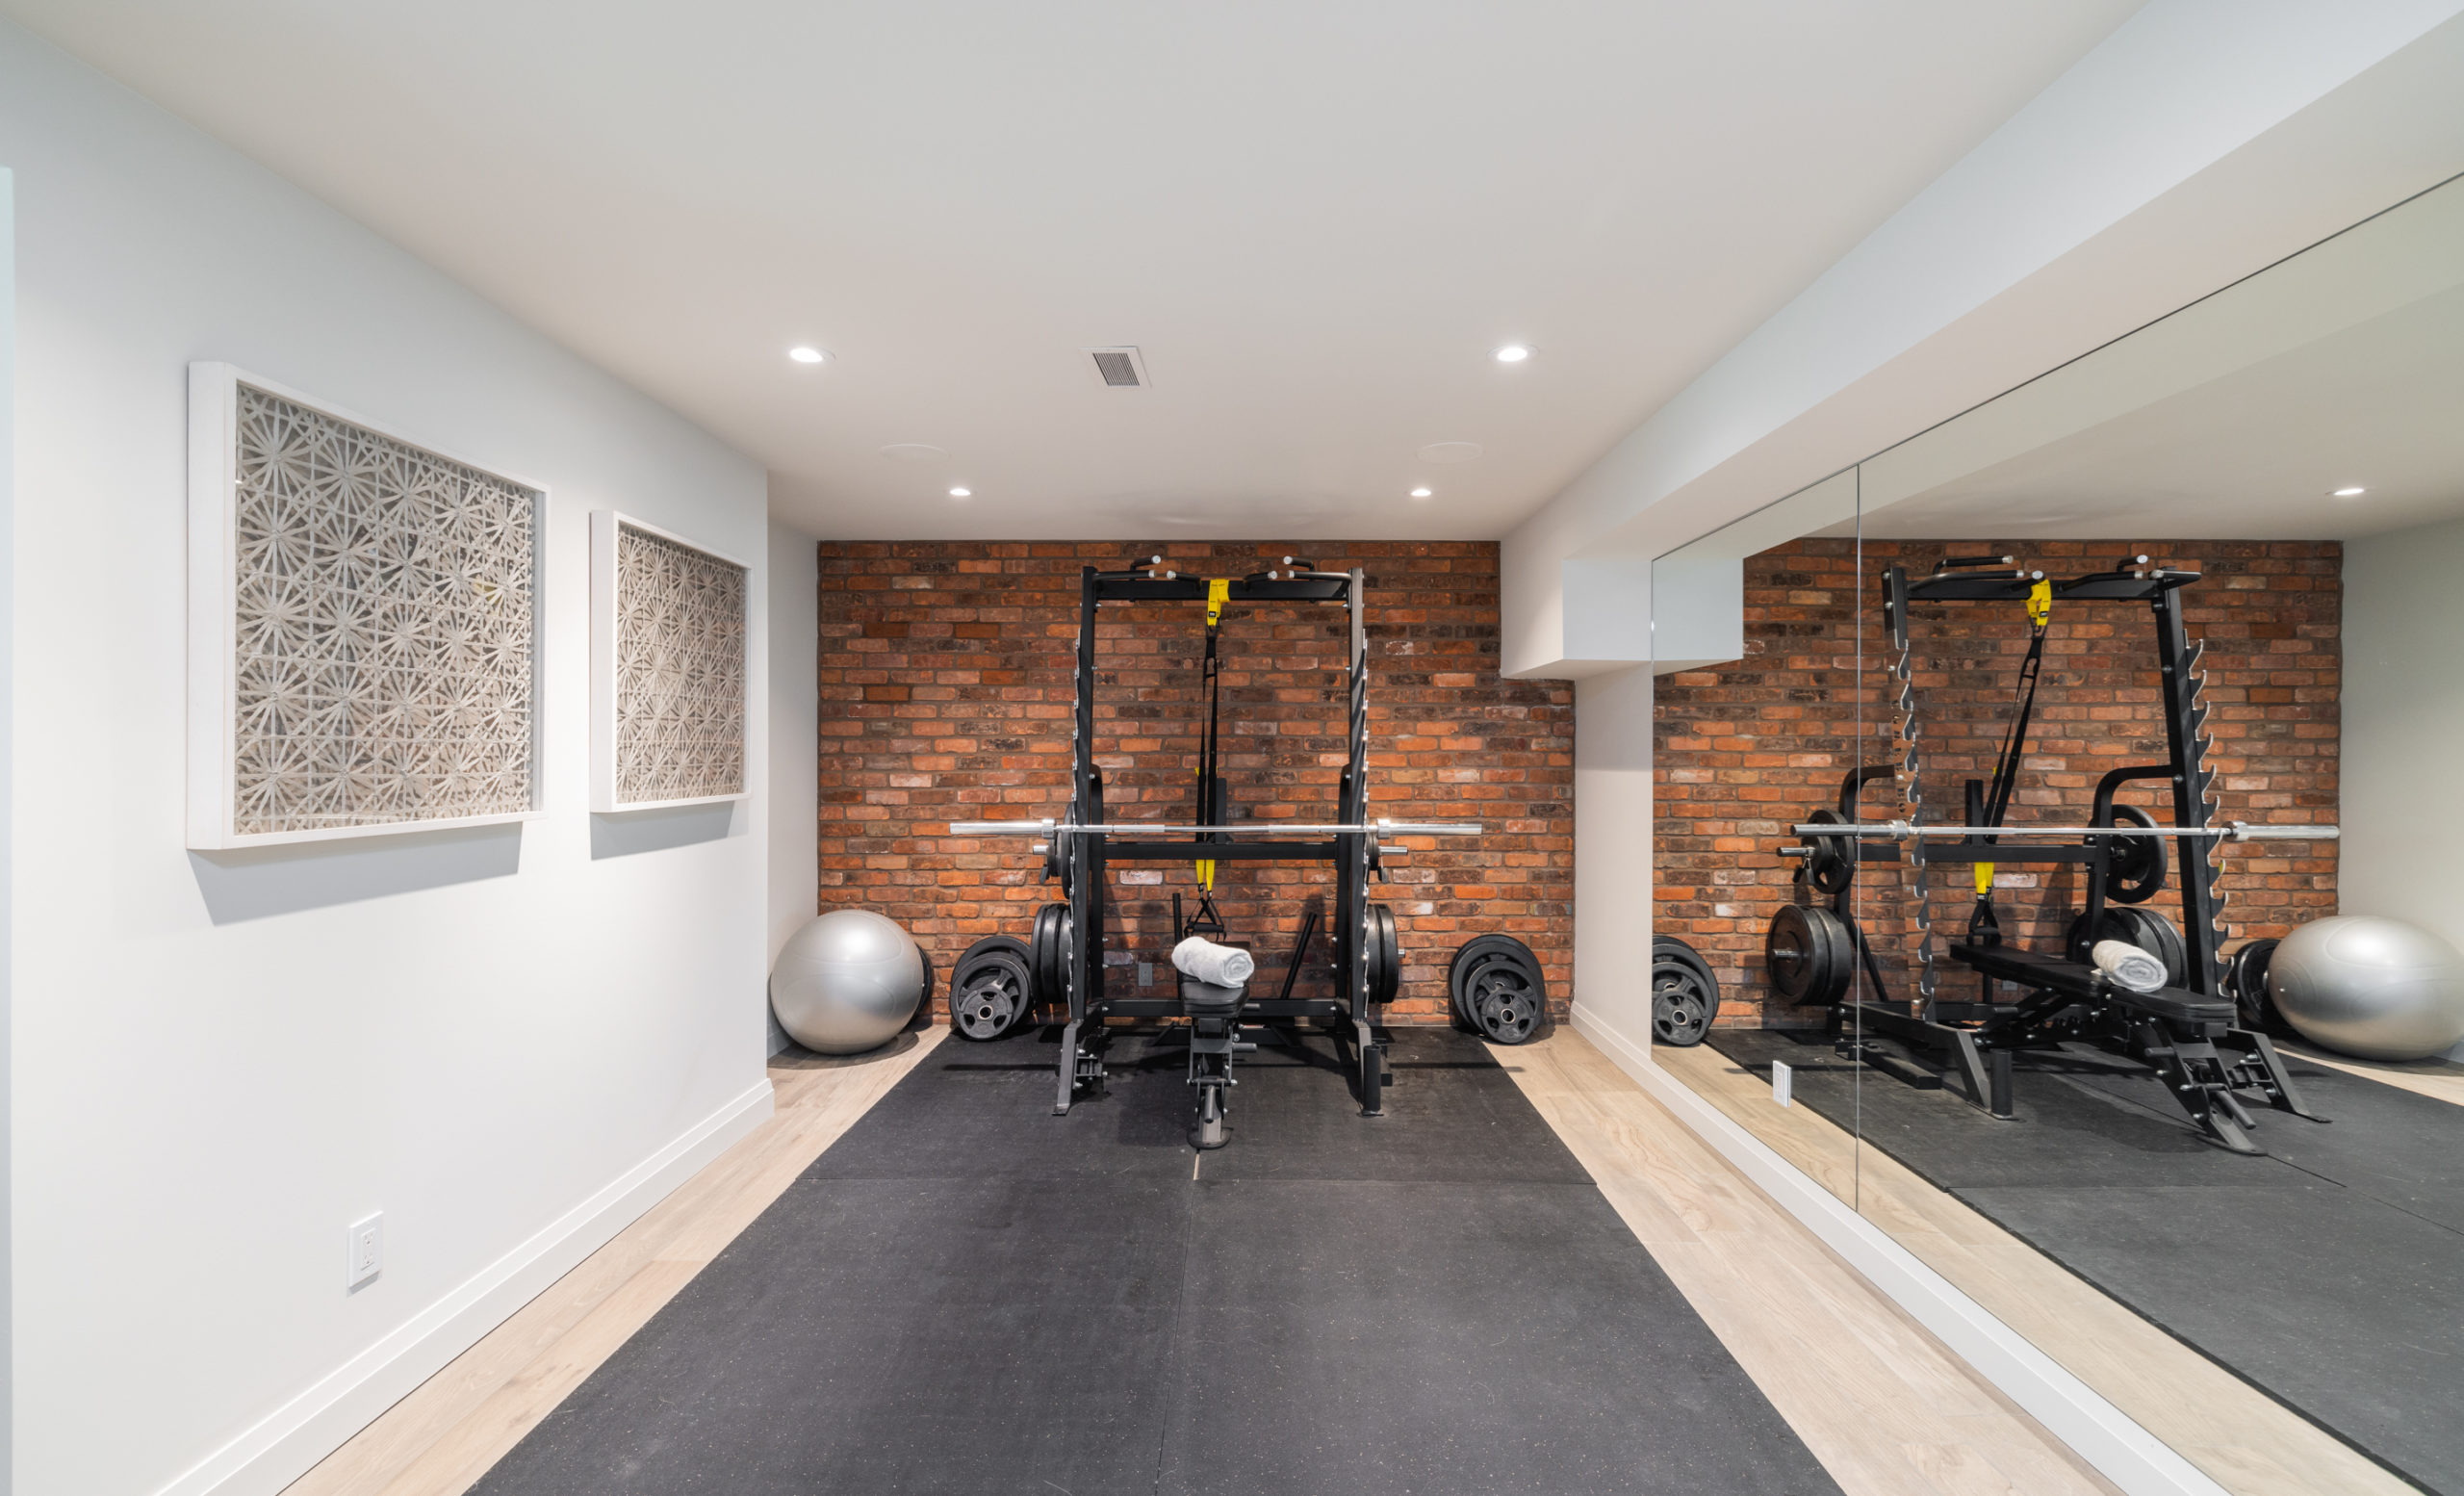 Here's the basement gym.